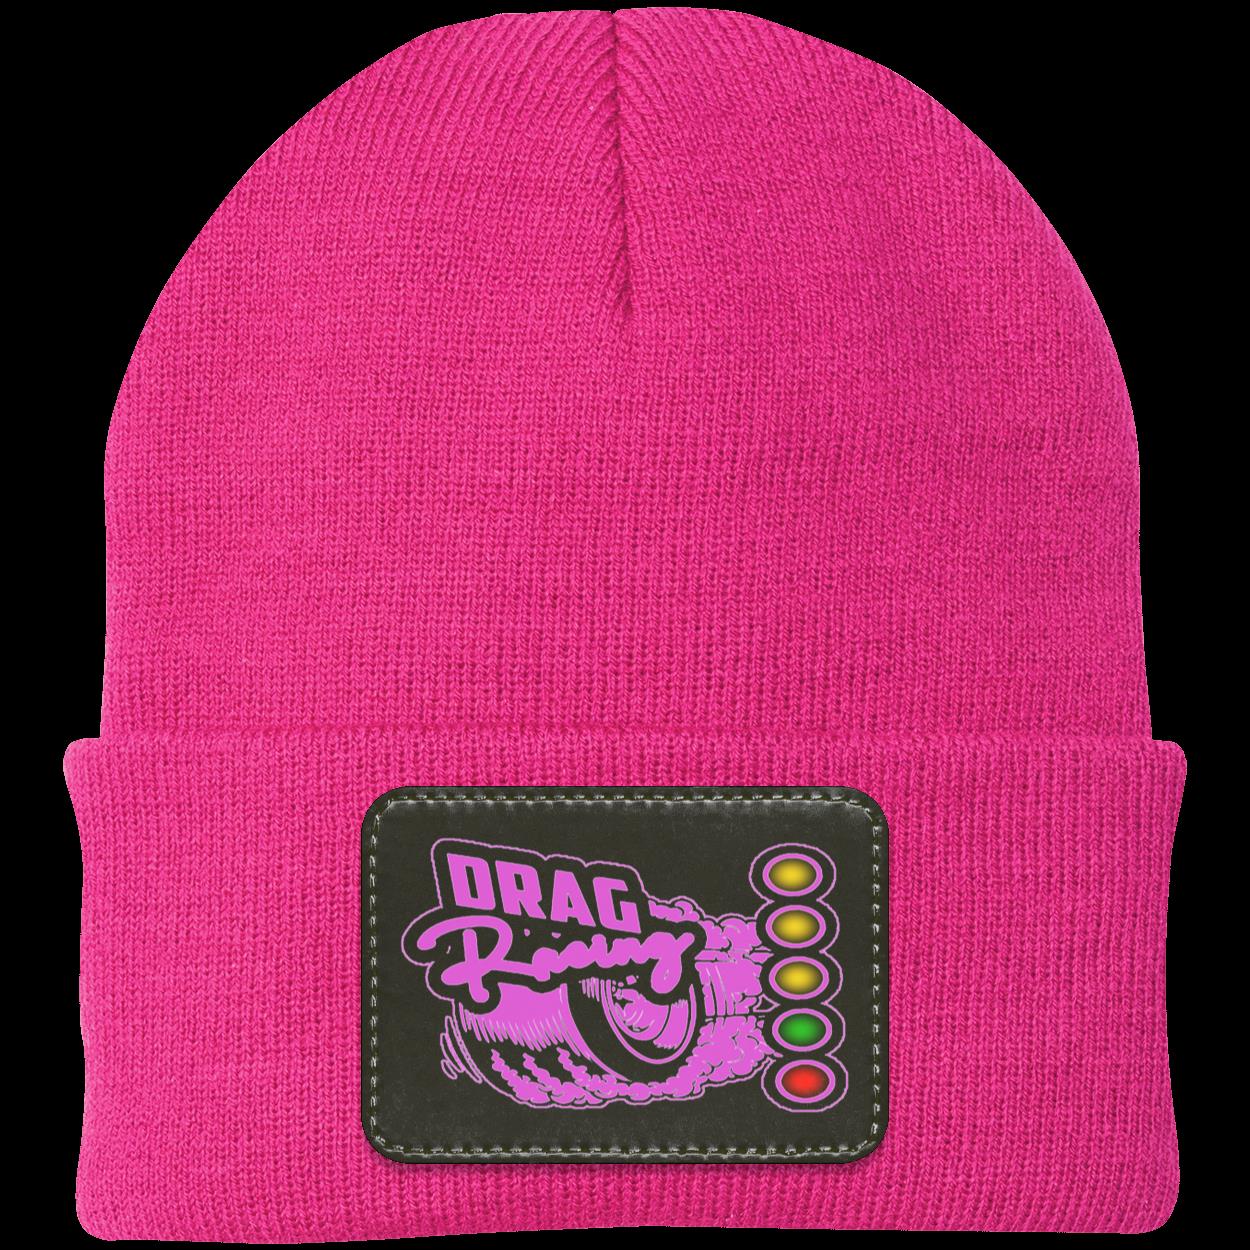 Drag Racing Patched Knit Cap V5